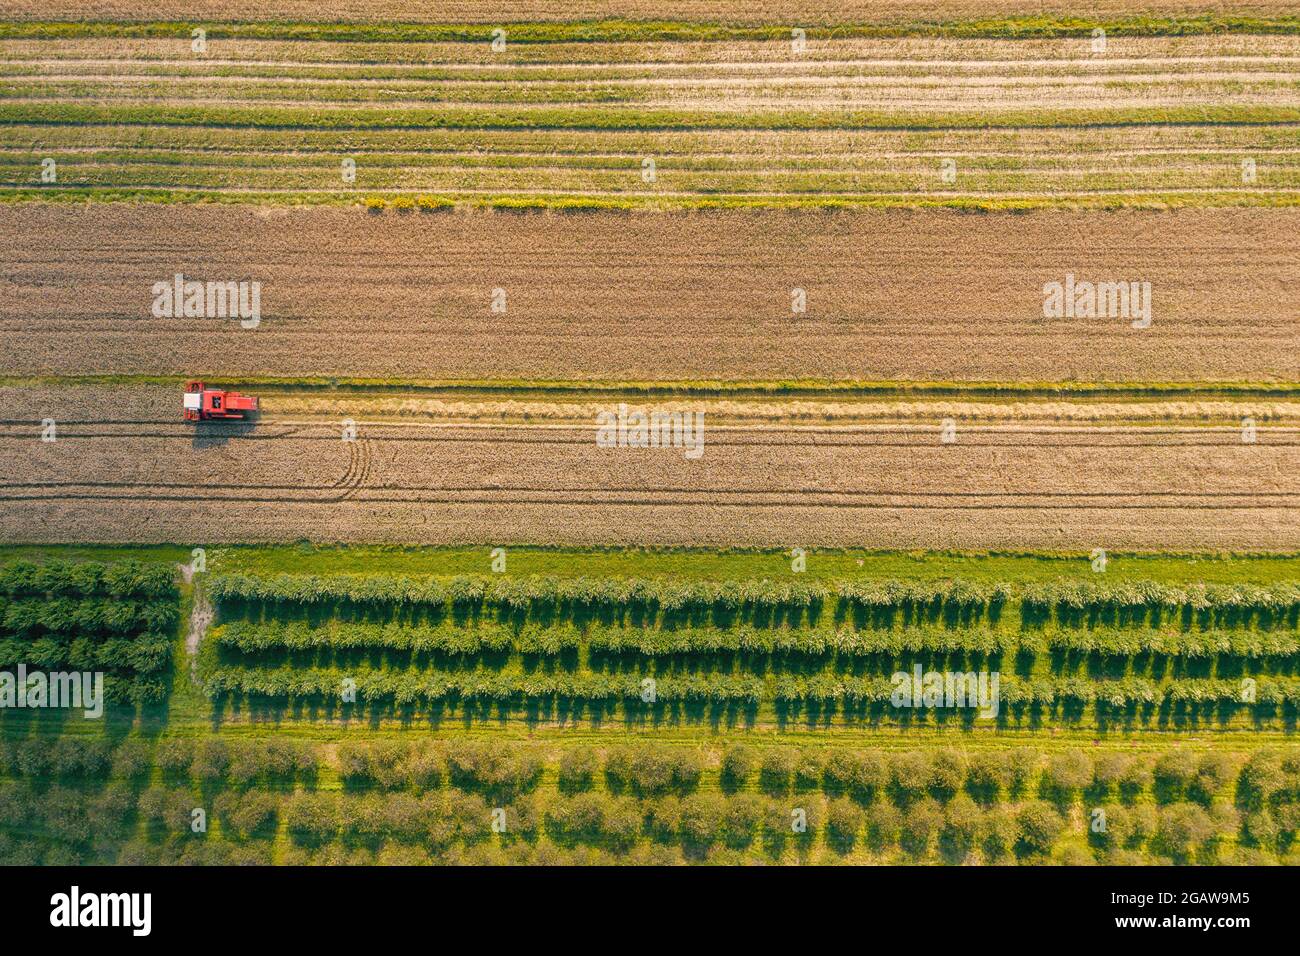 Drone picture of combine harvester  in the field Stock Photo